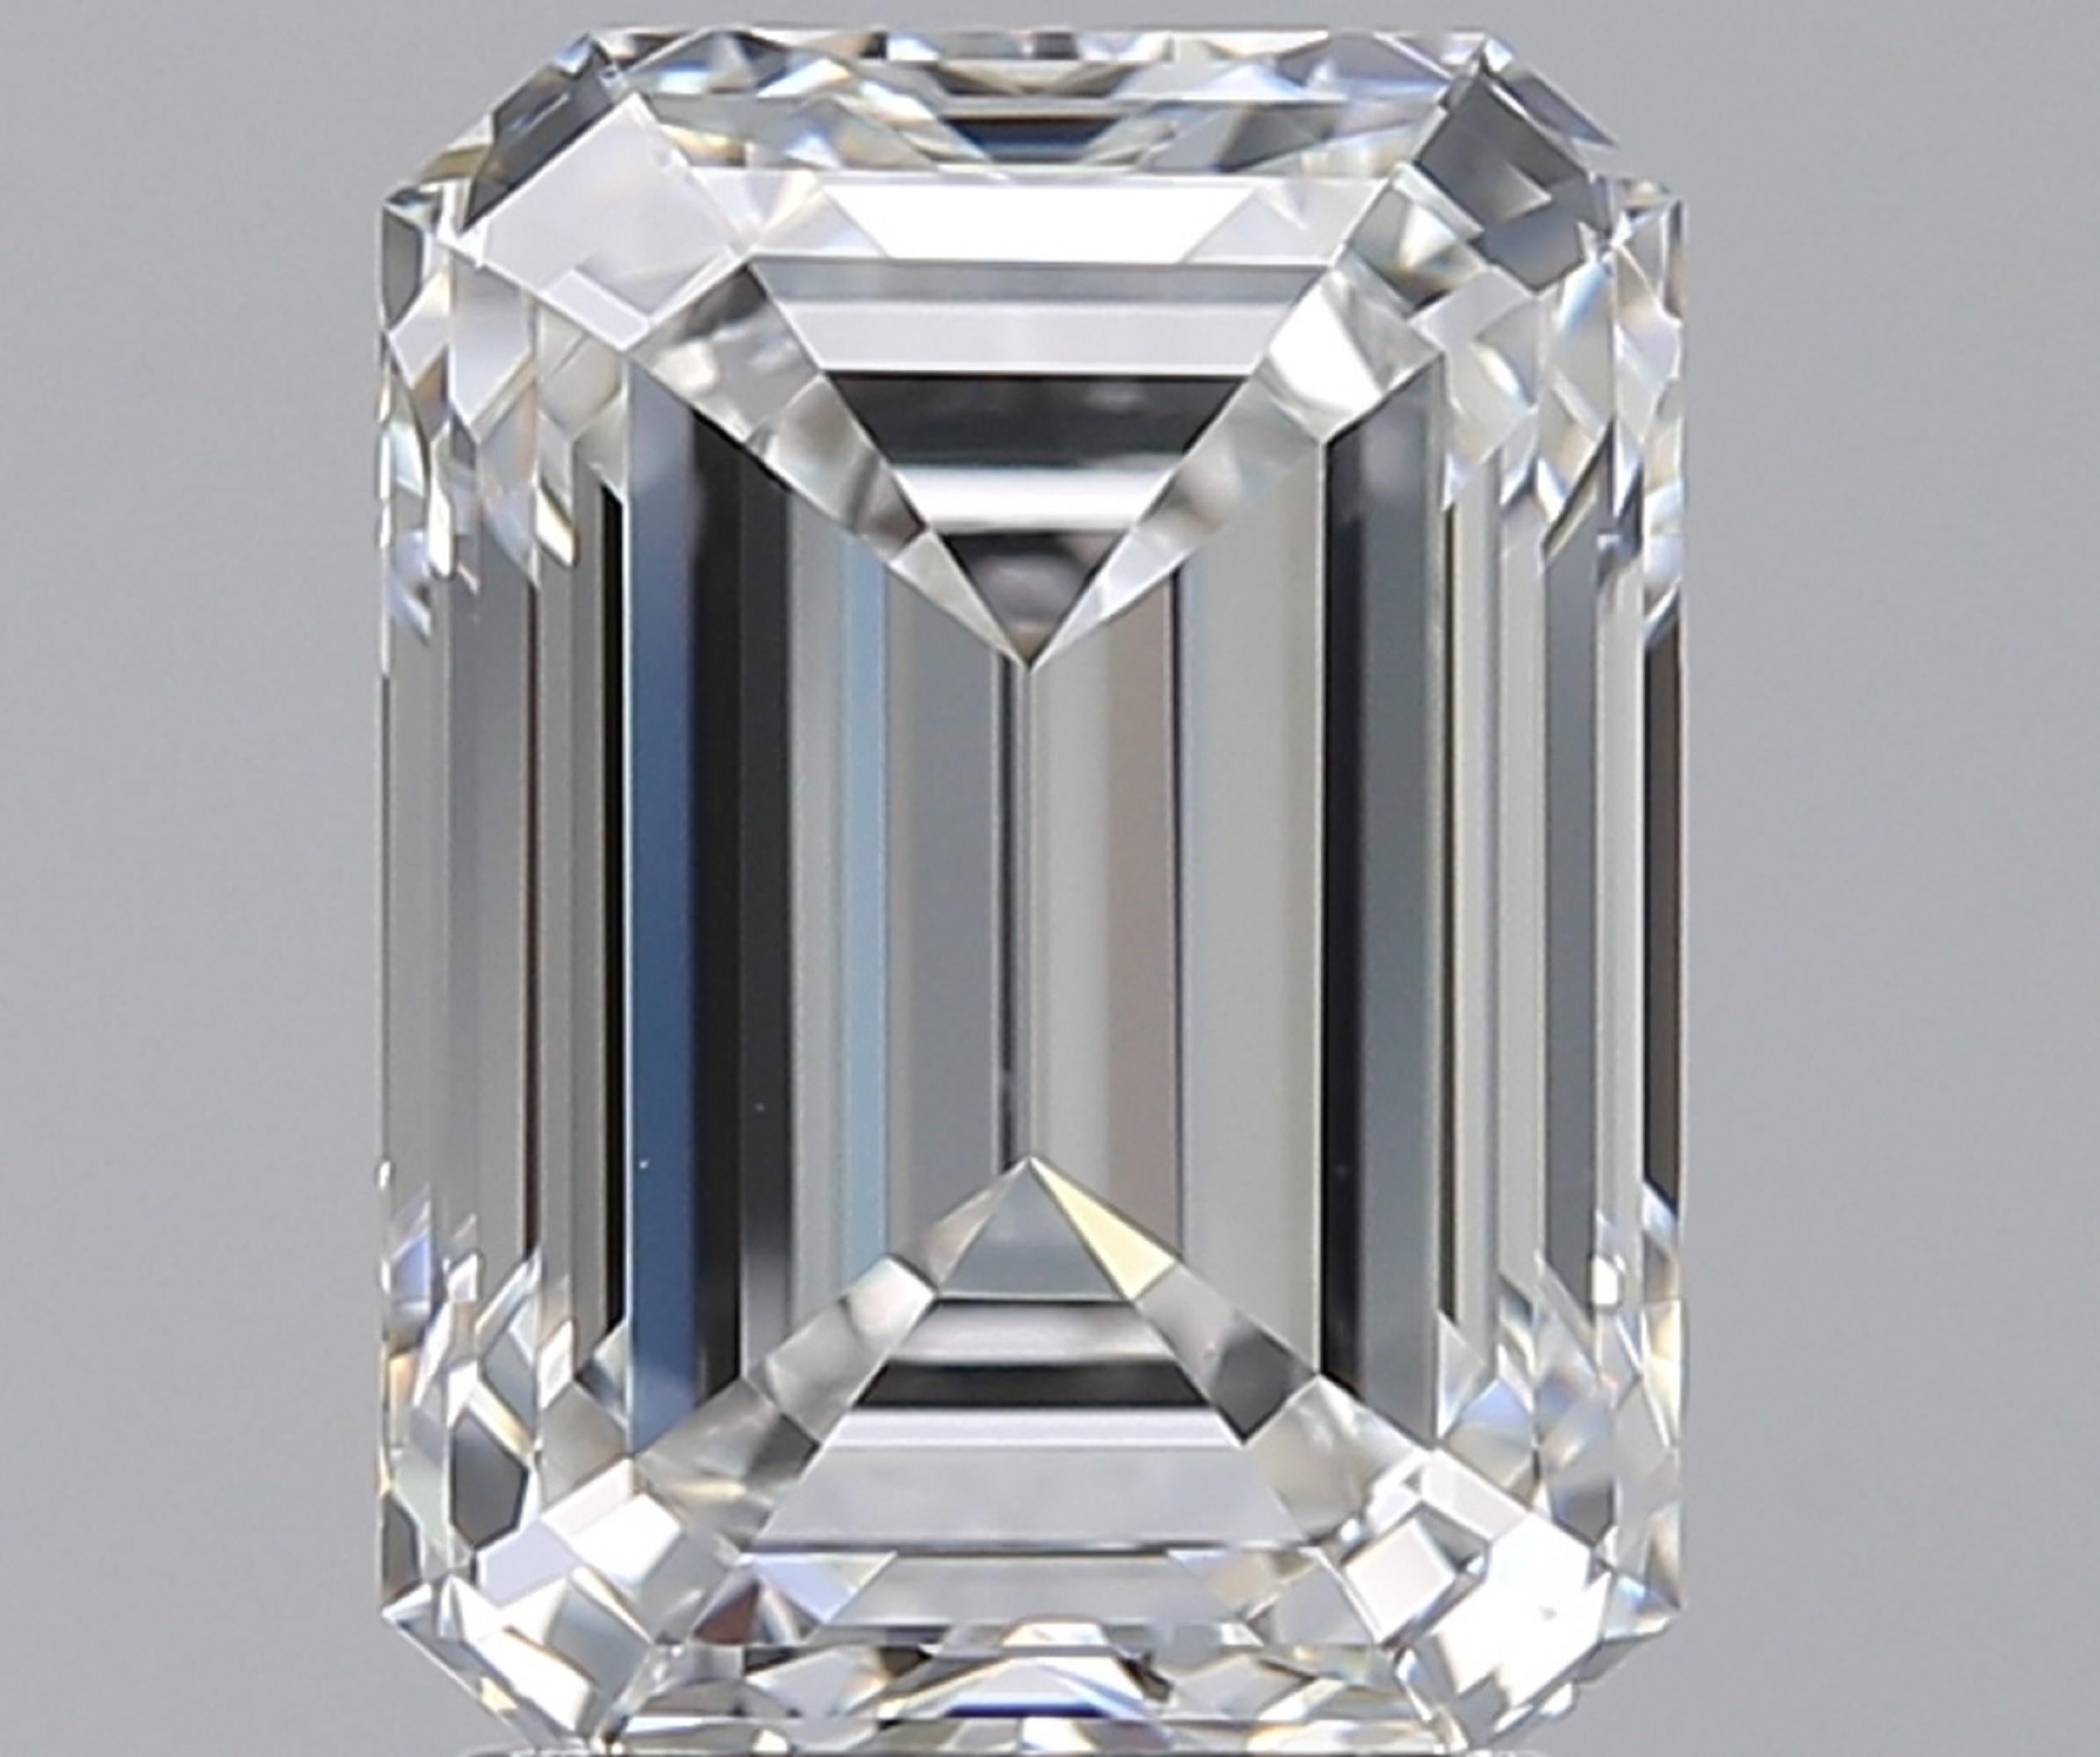 GIA Certified 3.65 Carat Emerald Cut Diamond Ring 
color is e
clarity is vvs2
The main stone weights 3.01 carats